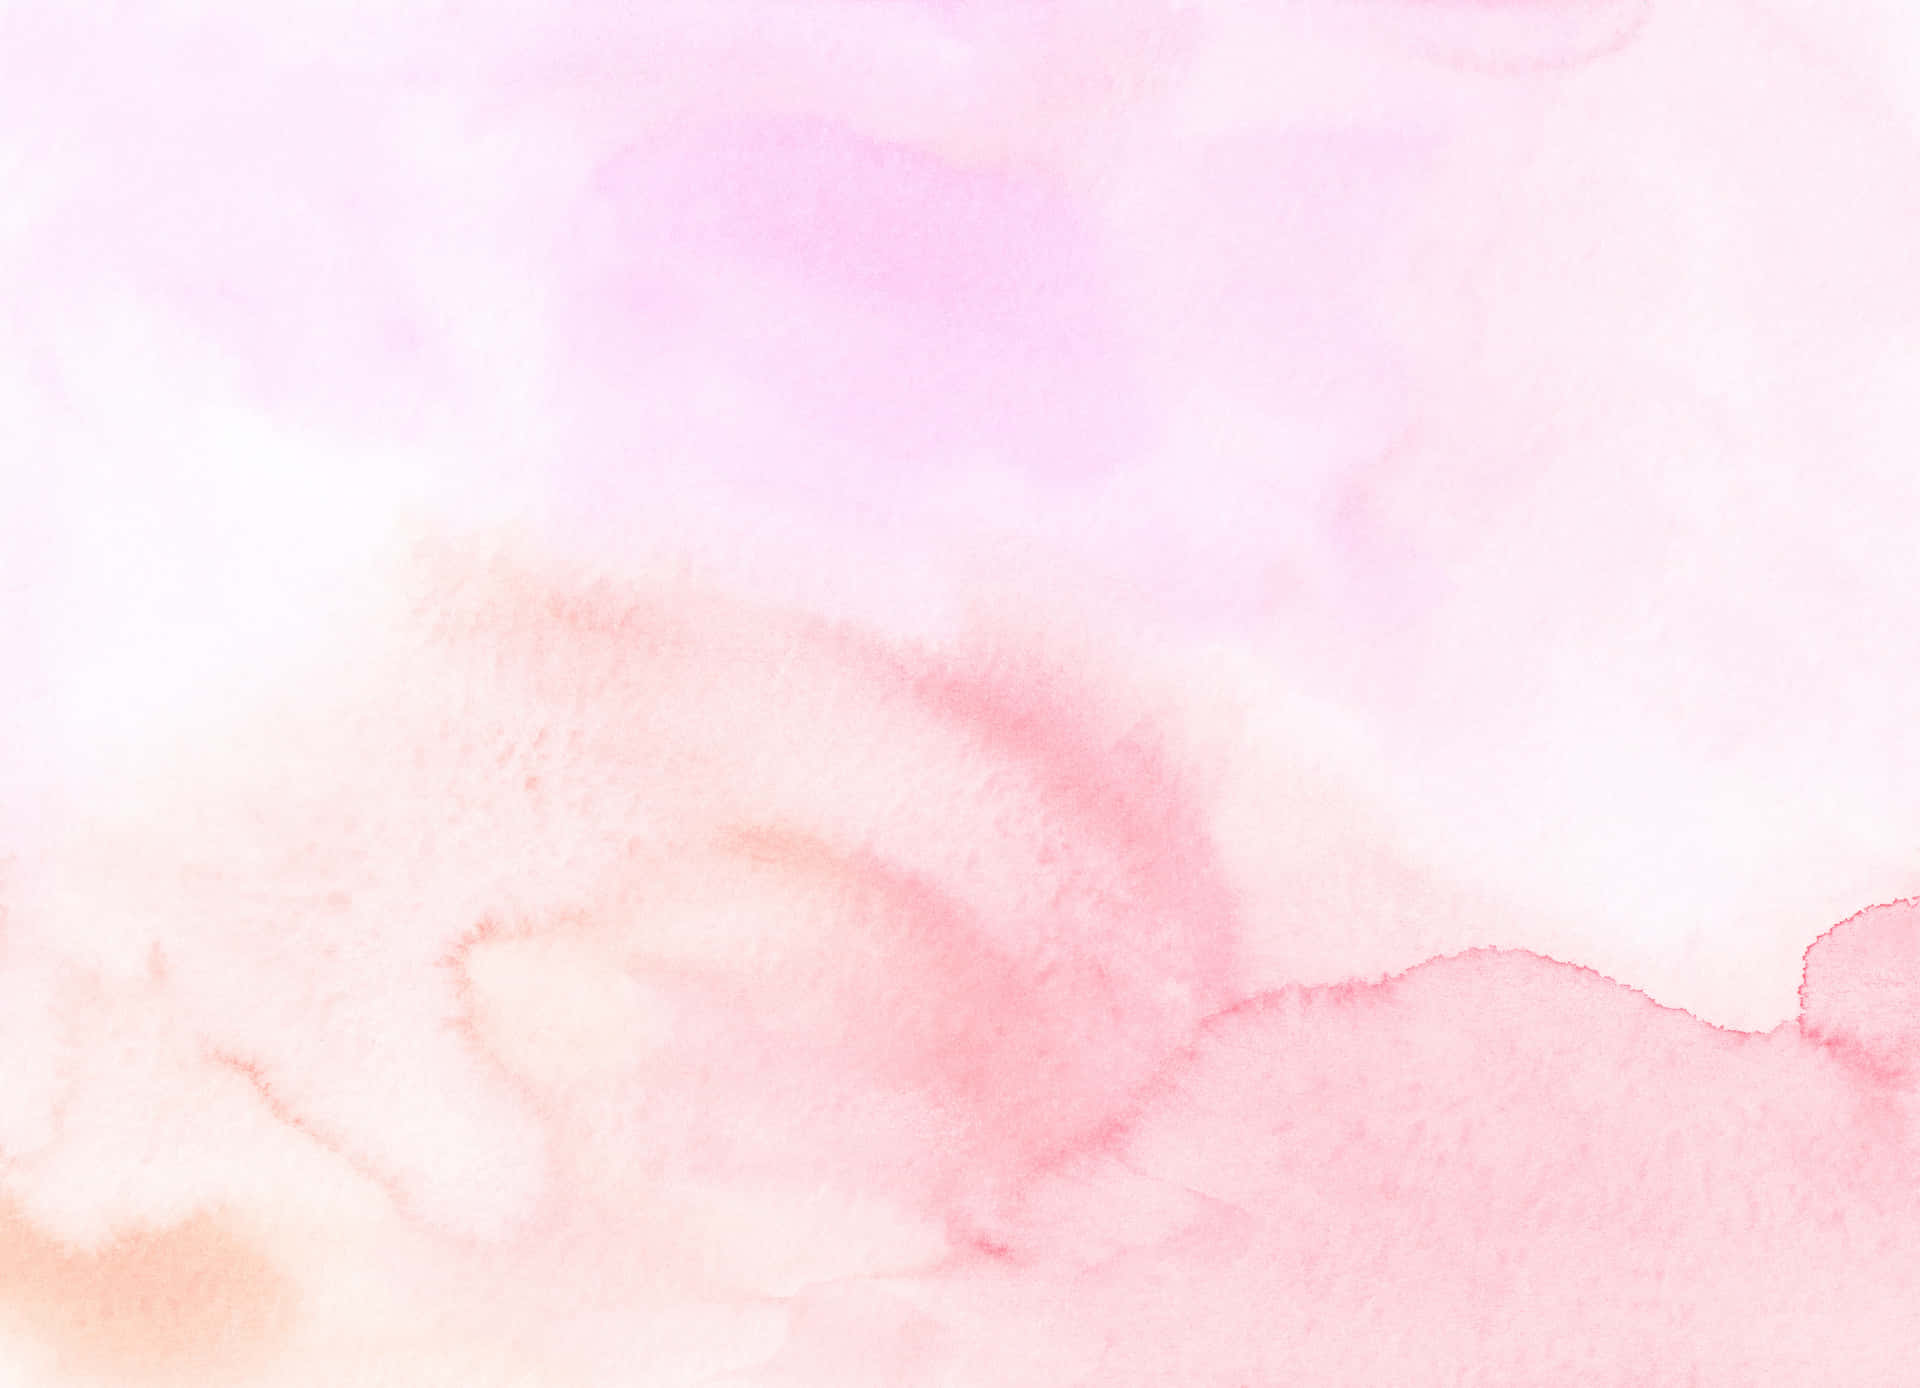 Soft pink background with a softly textured, subtle pattern.